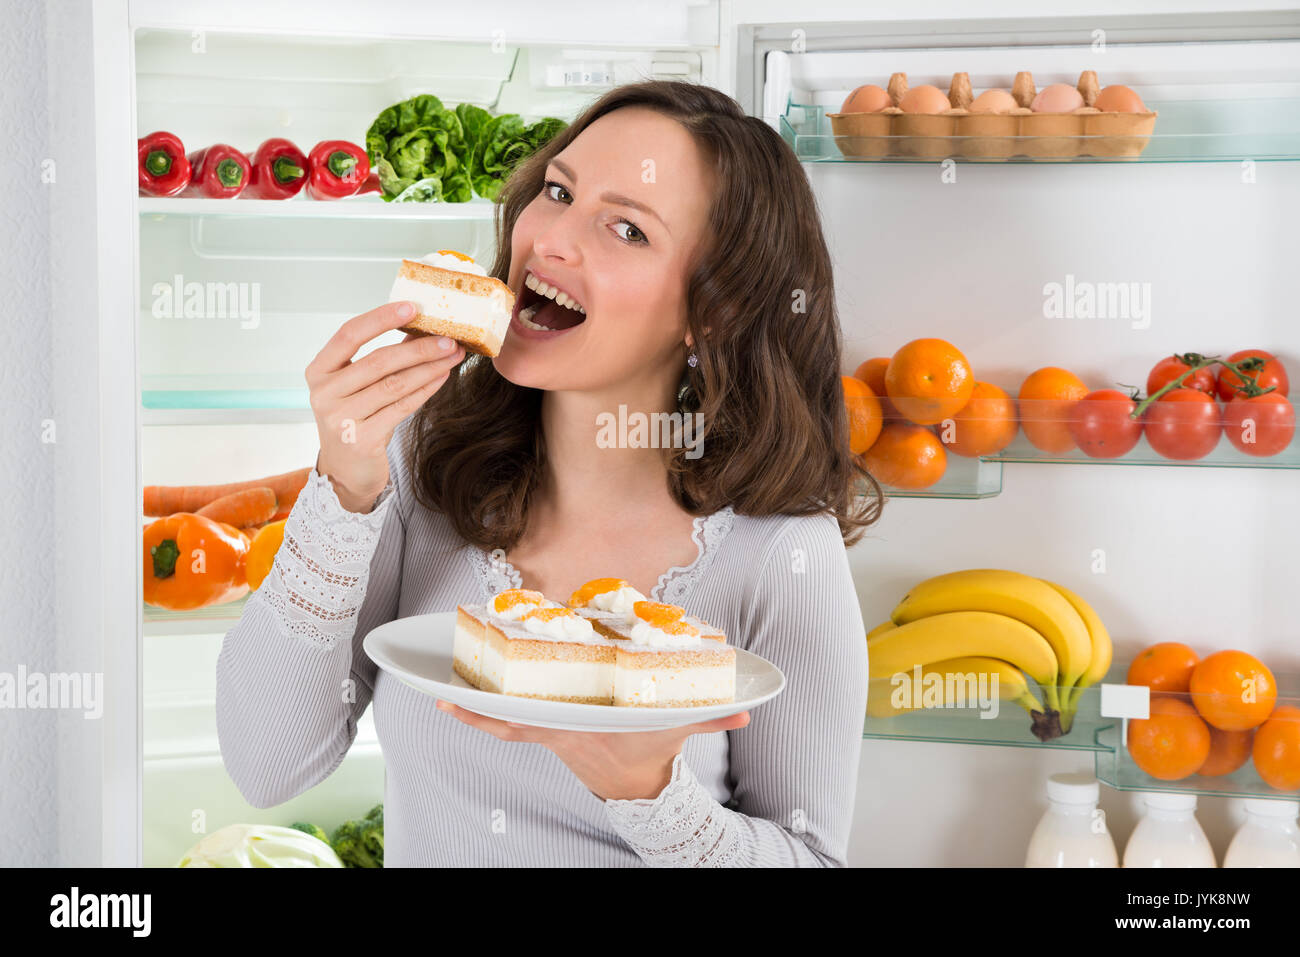 Young Woman Eating Slice Of Cake Near The Open Refrigerator Stock Photo